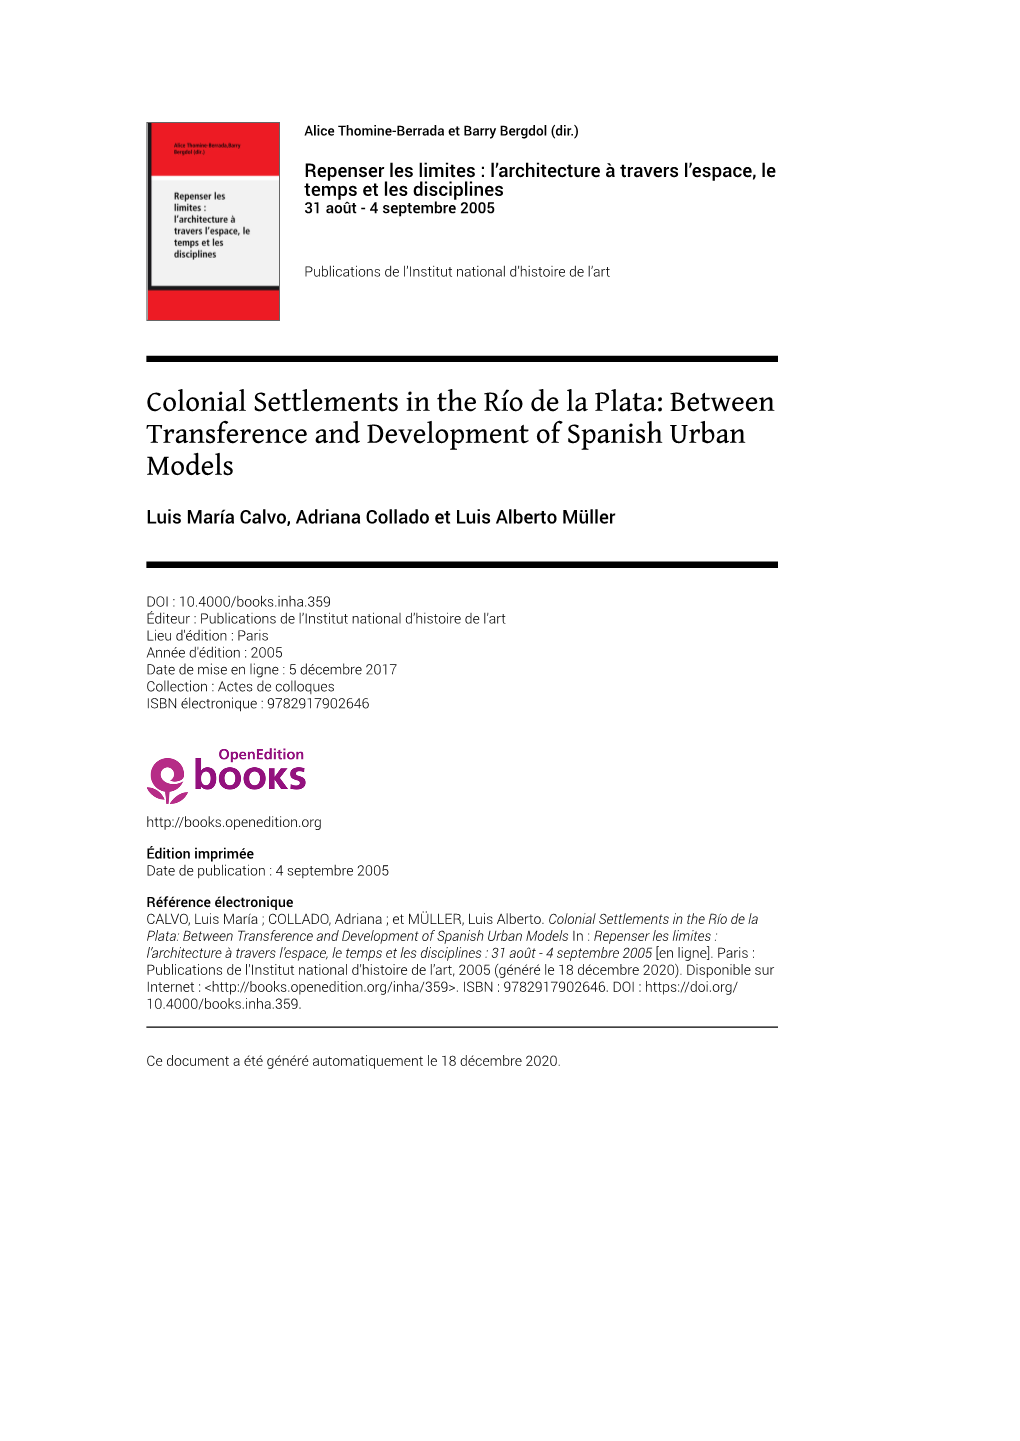 Colonial Settlements in the Río De La Plata: Between Transference and Development of Spanish Urban Models